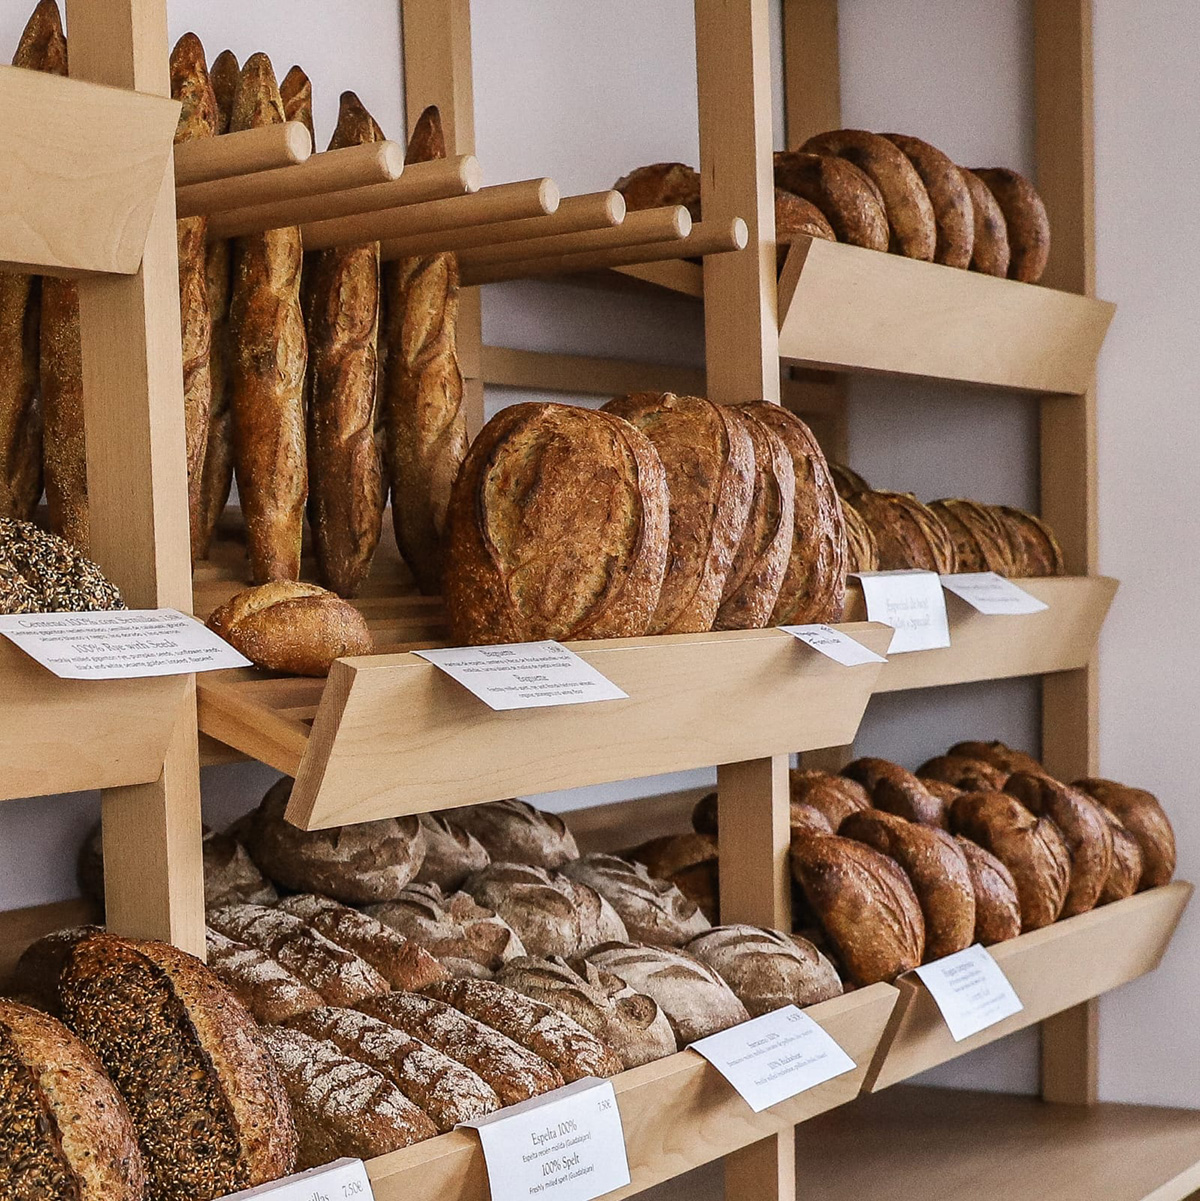 Pan Bendito offers fresh daily bread made from locally sourced flour and ancient grains